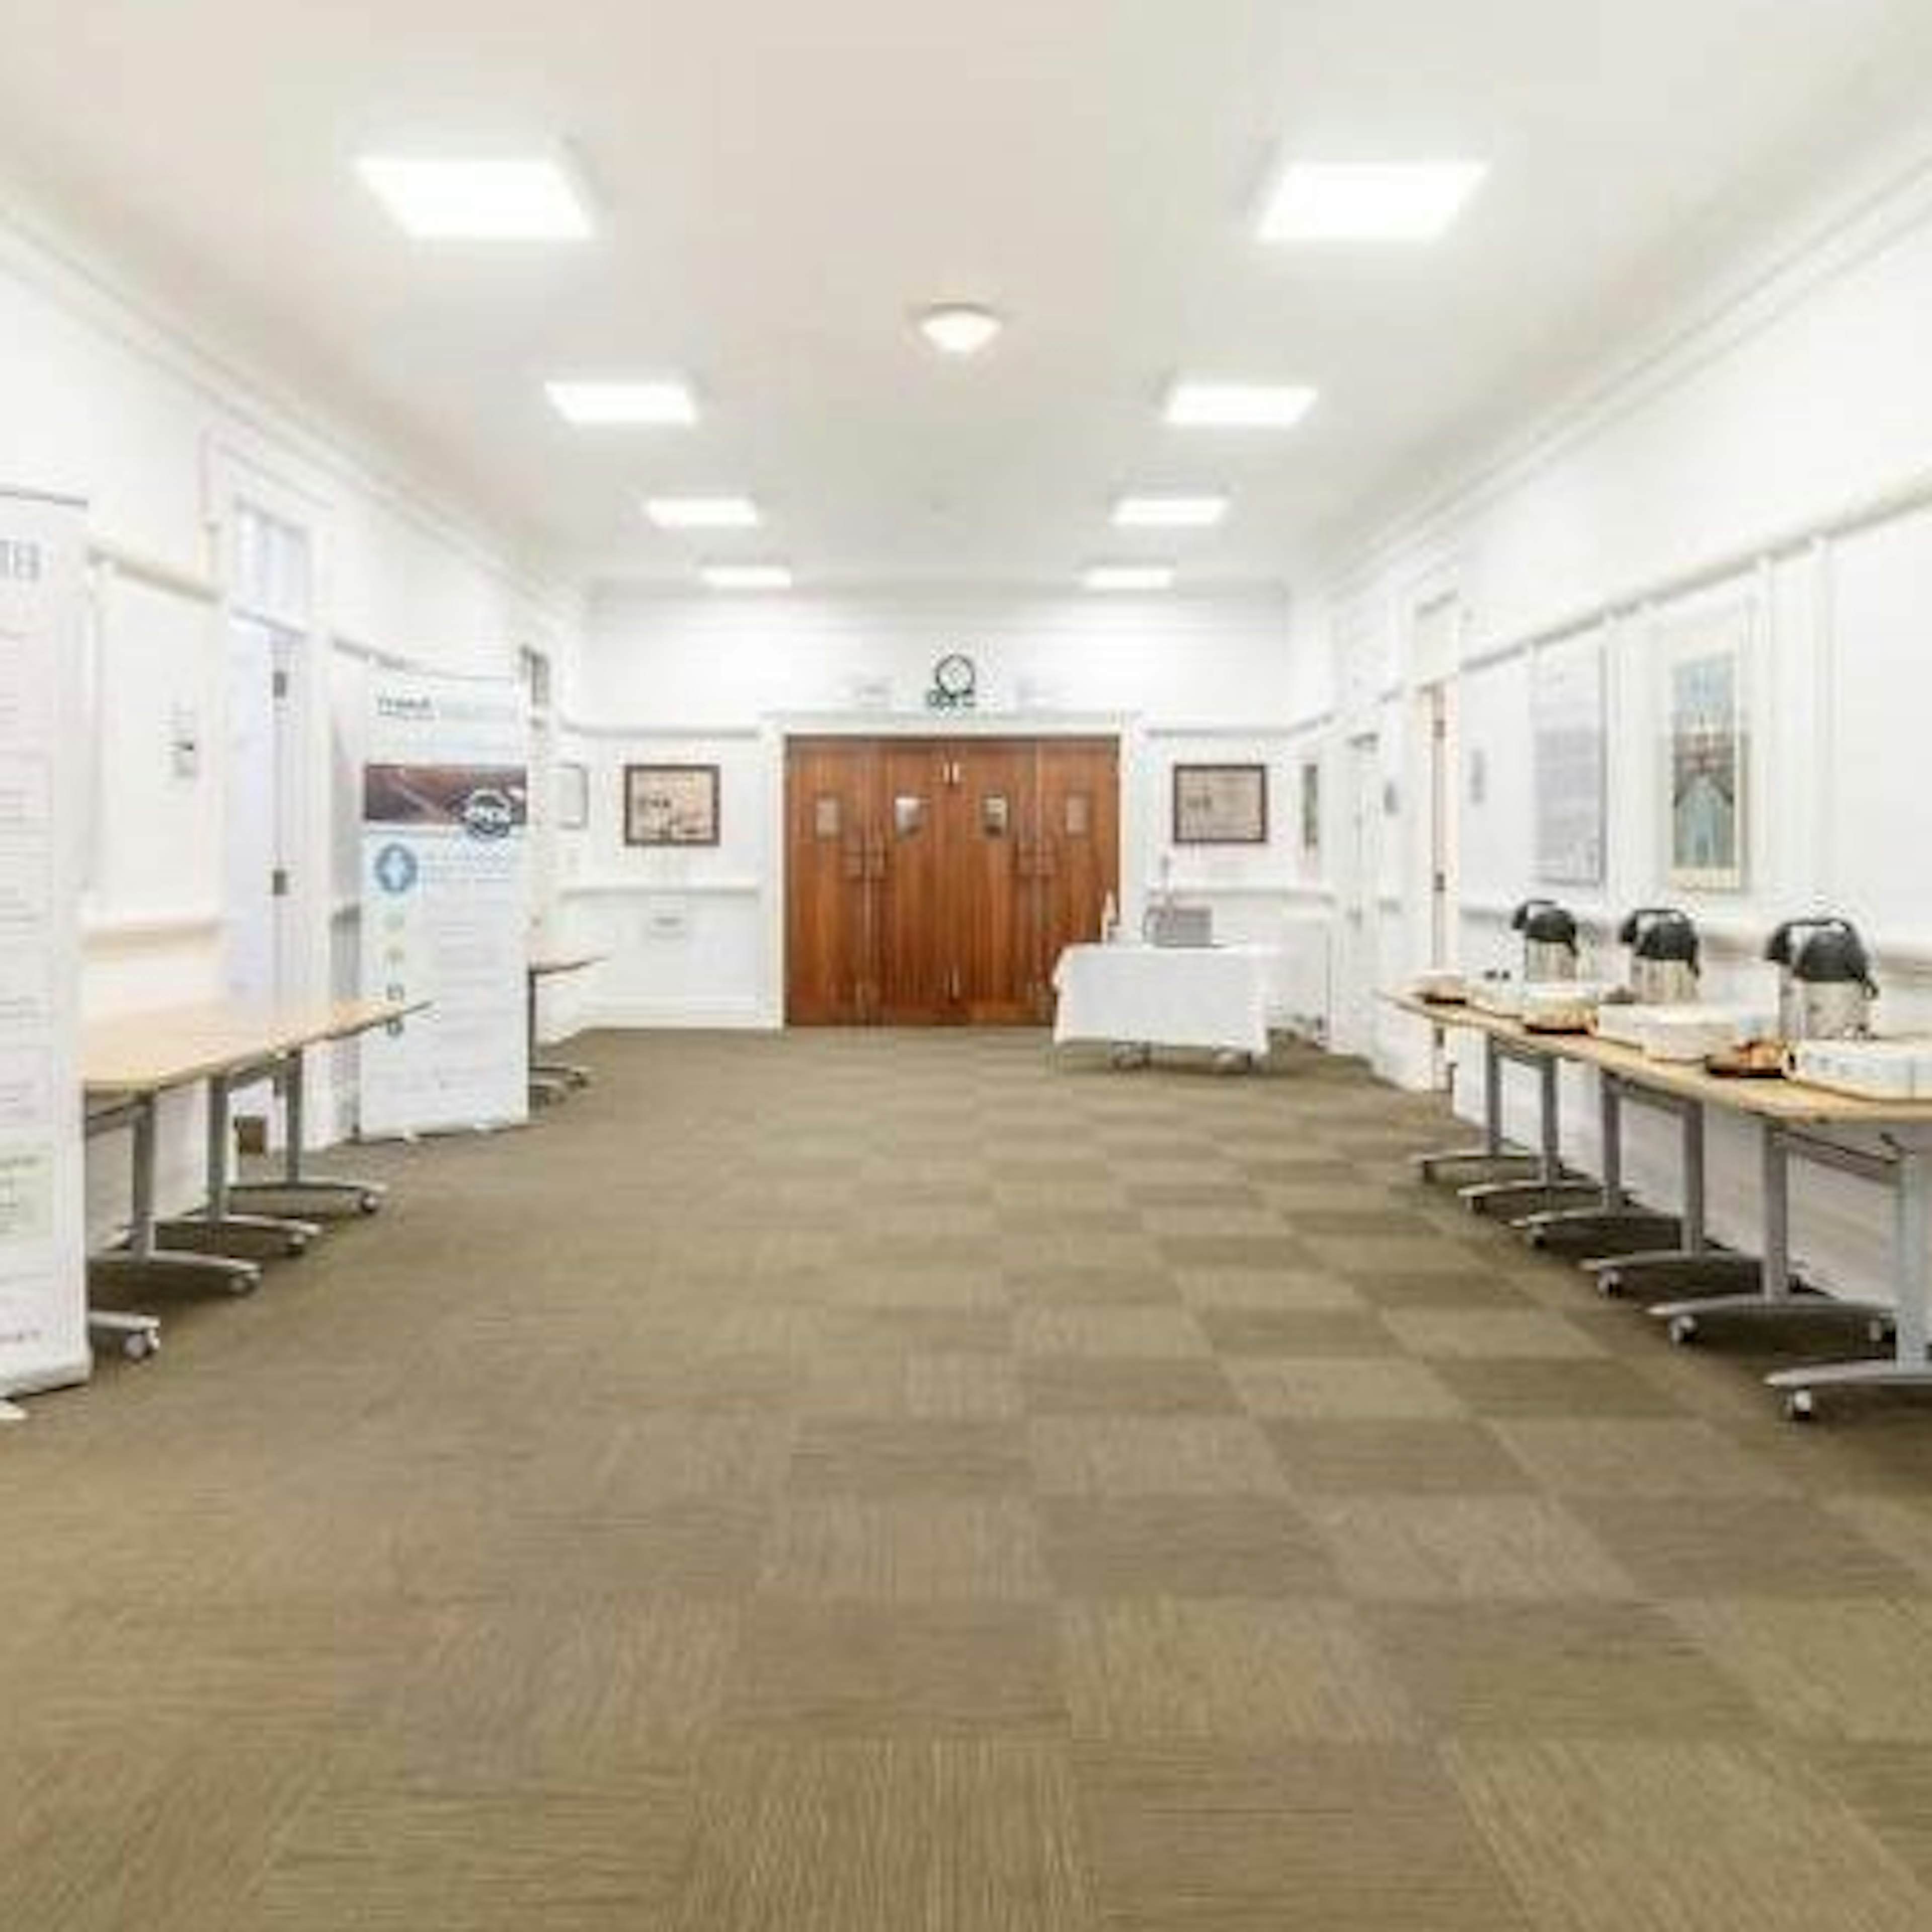 South Manchester Meeting Rooms - Friends Meeting House - image 3